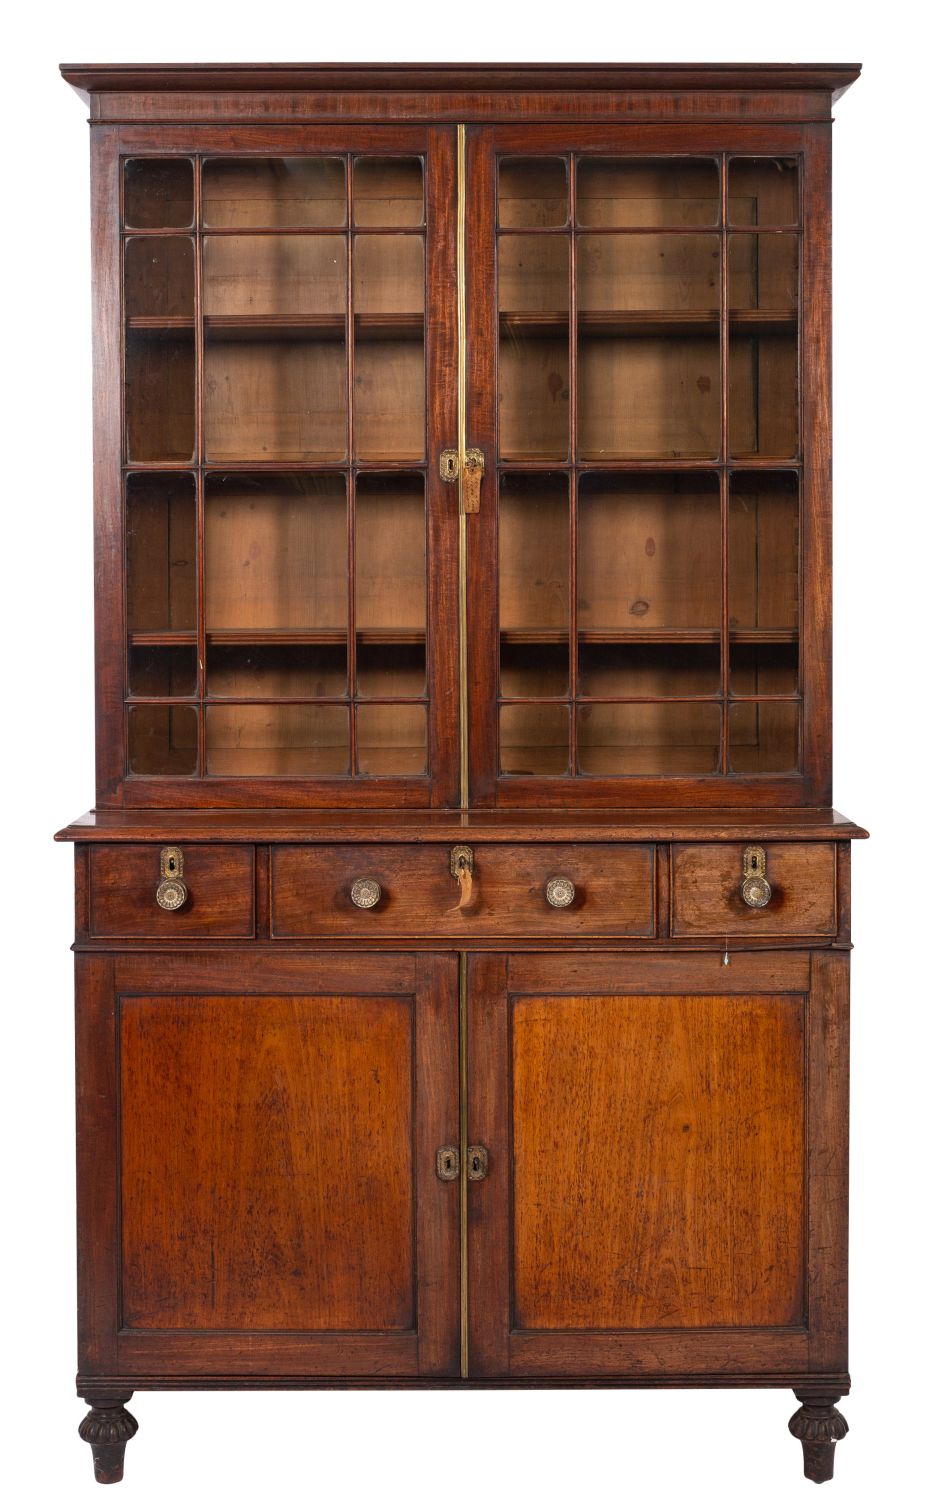 A William IV mahogany bookcase, the upper part with a moulded cornice, - Image 2 of 2